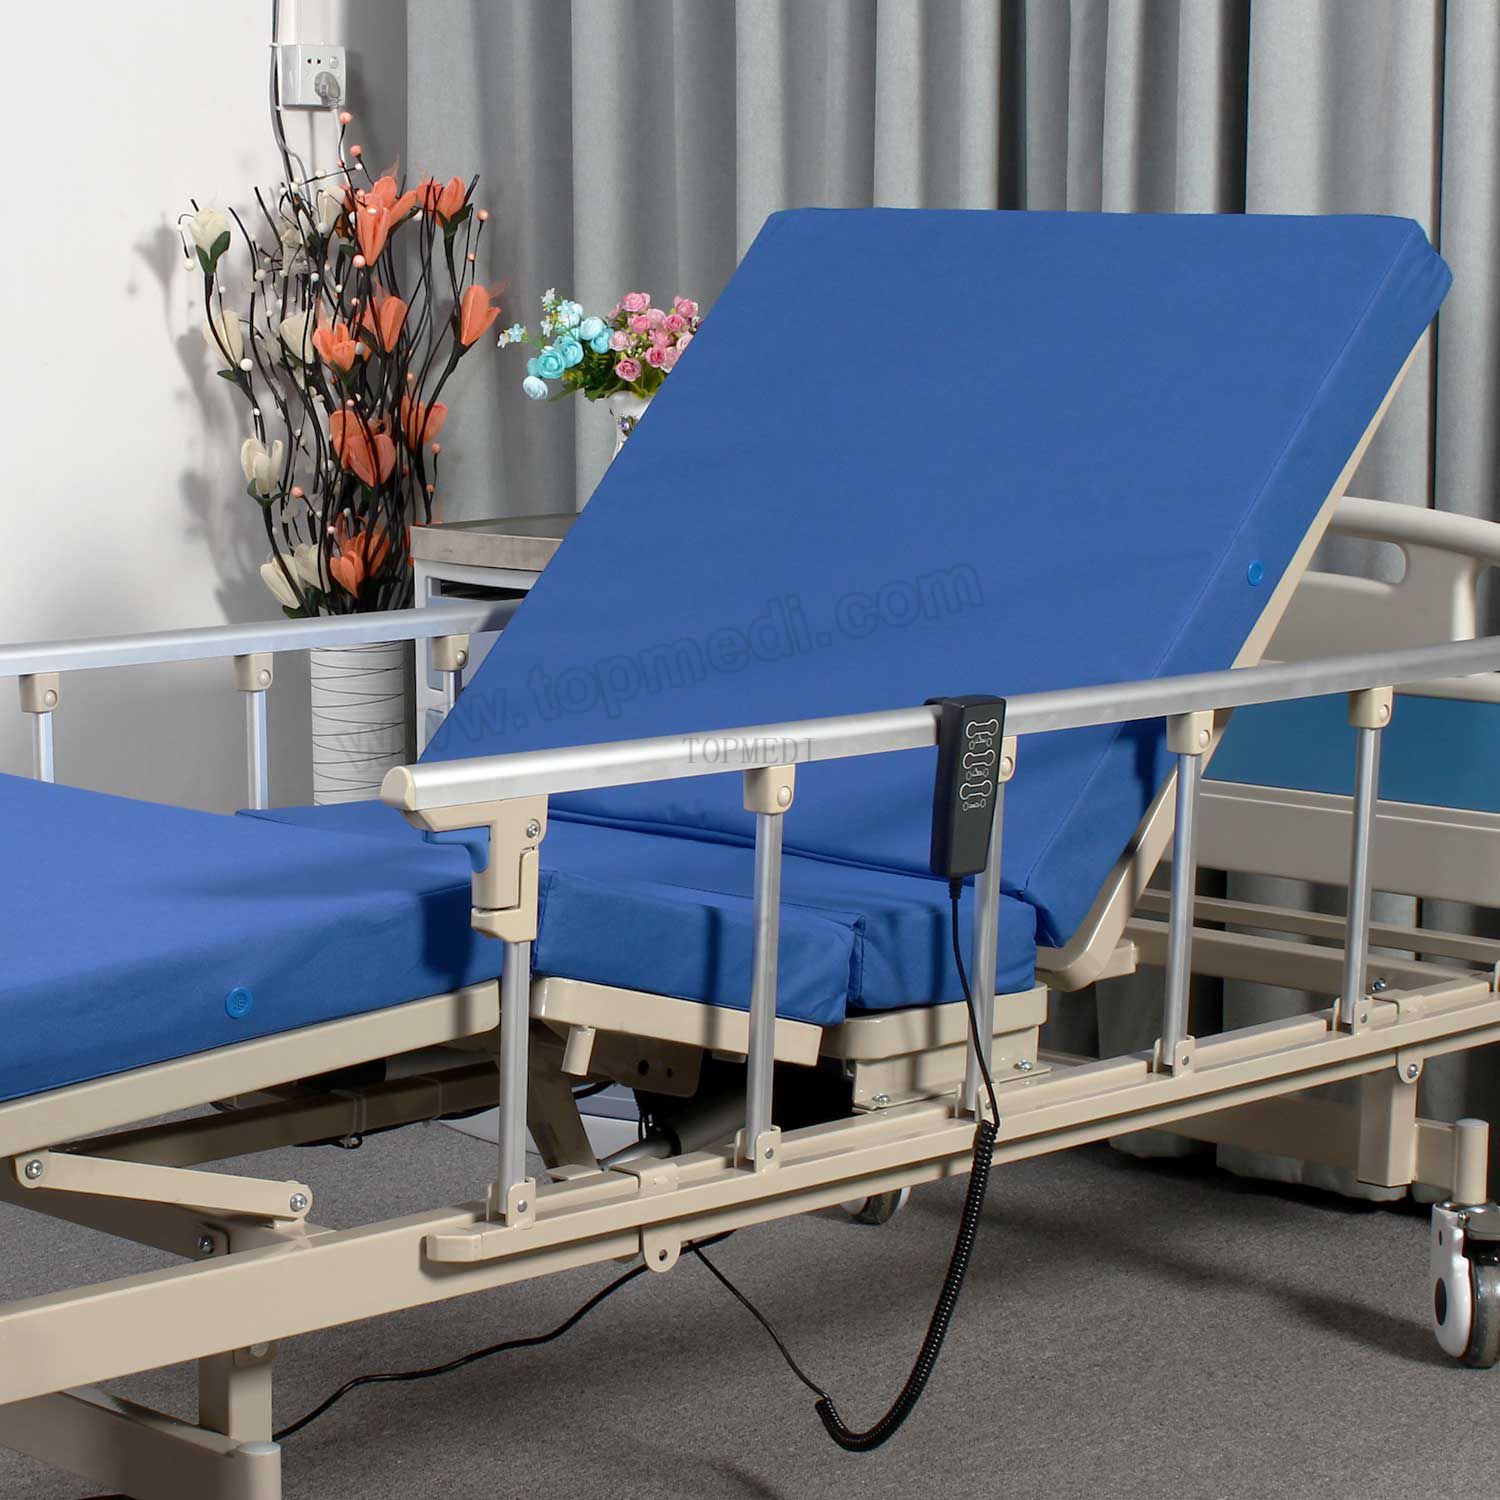 What are hospital beds and types of beds?